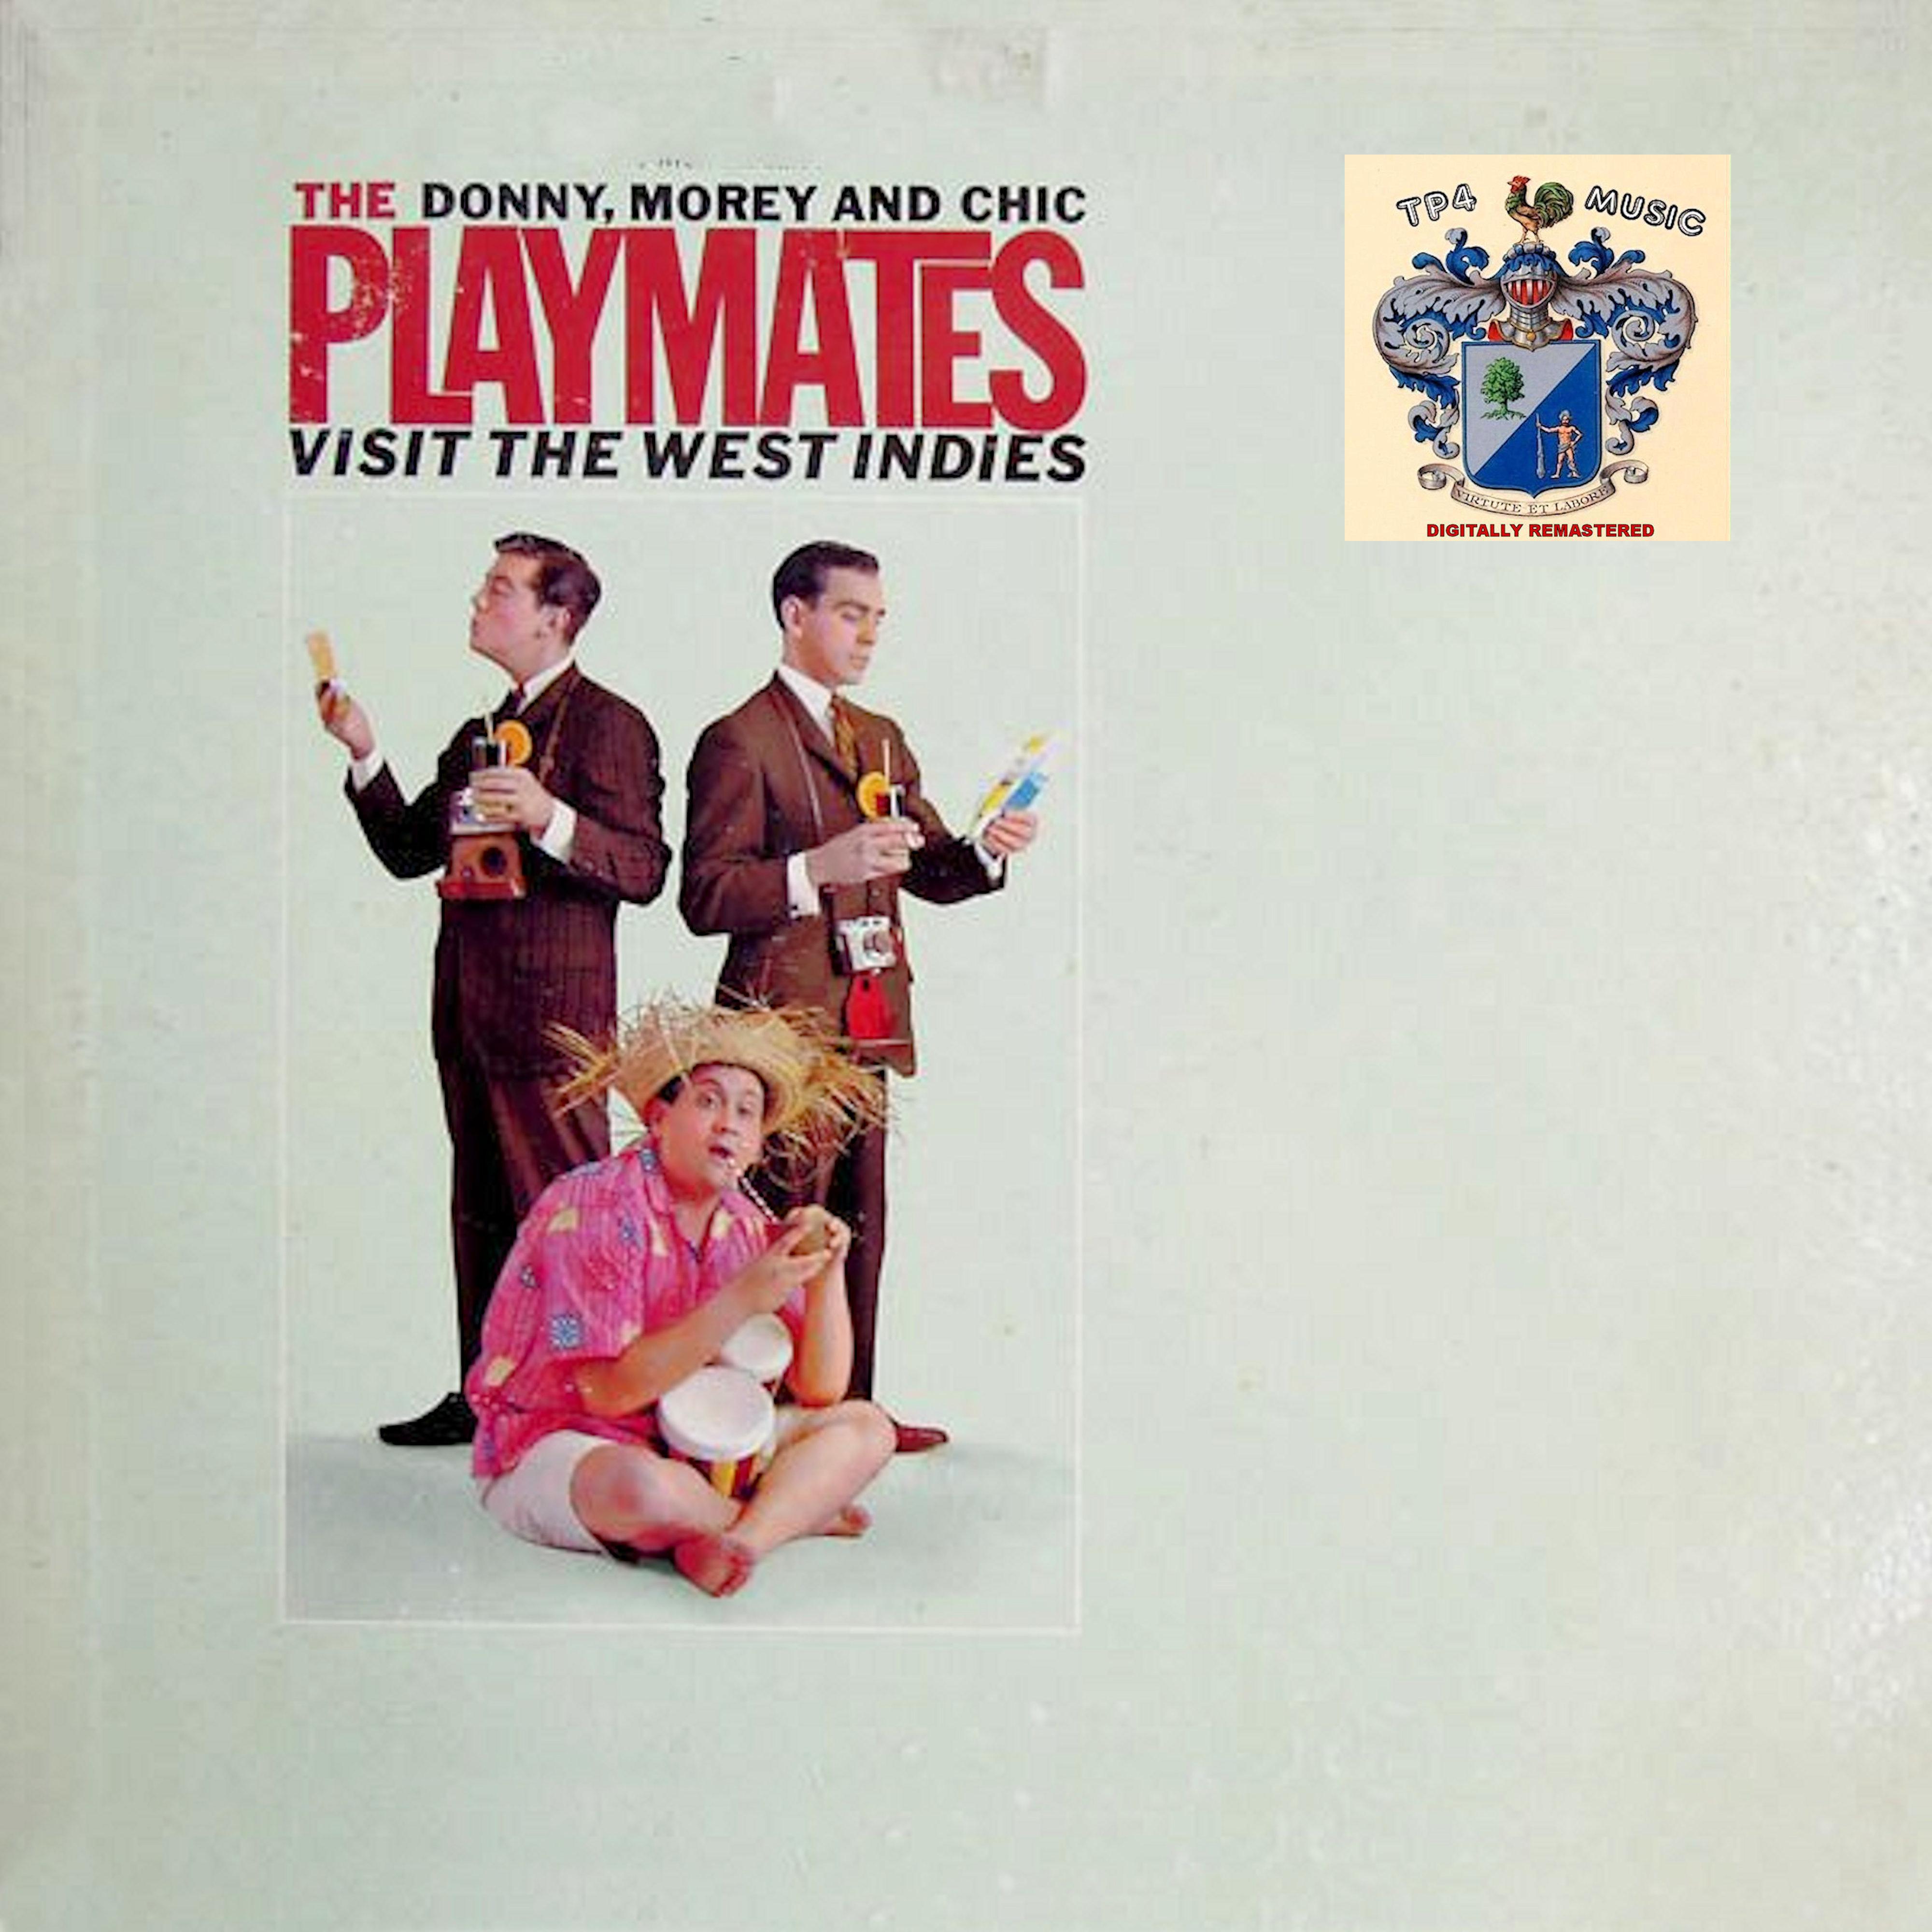 The Playmates - Women Drivers